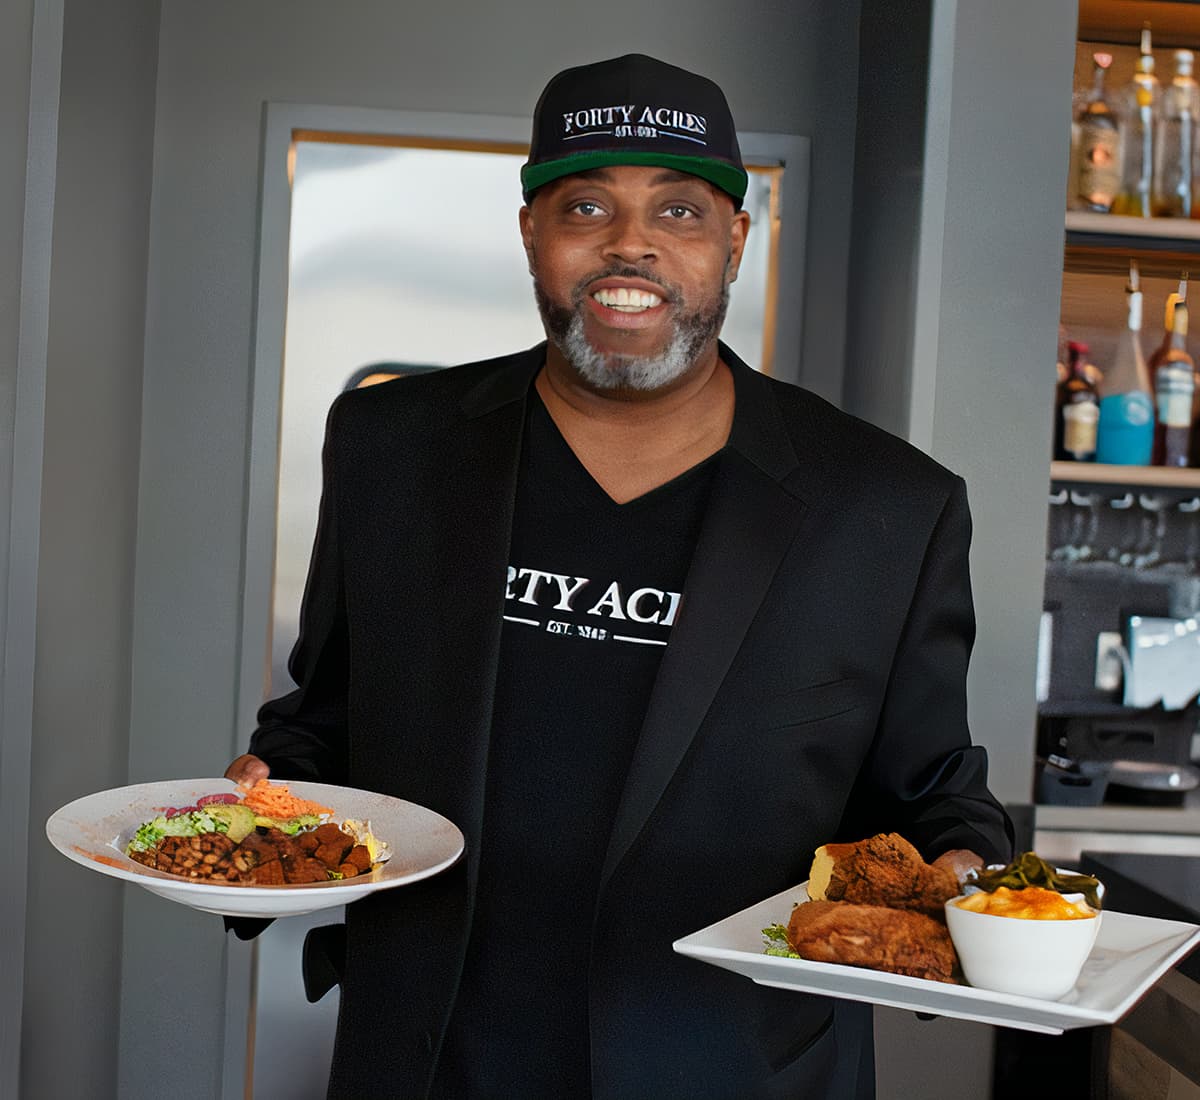 A man in a black suit carrying two plates of food in a restaurant